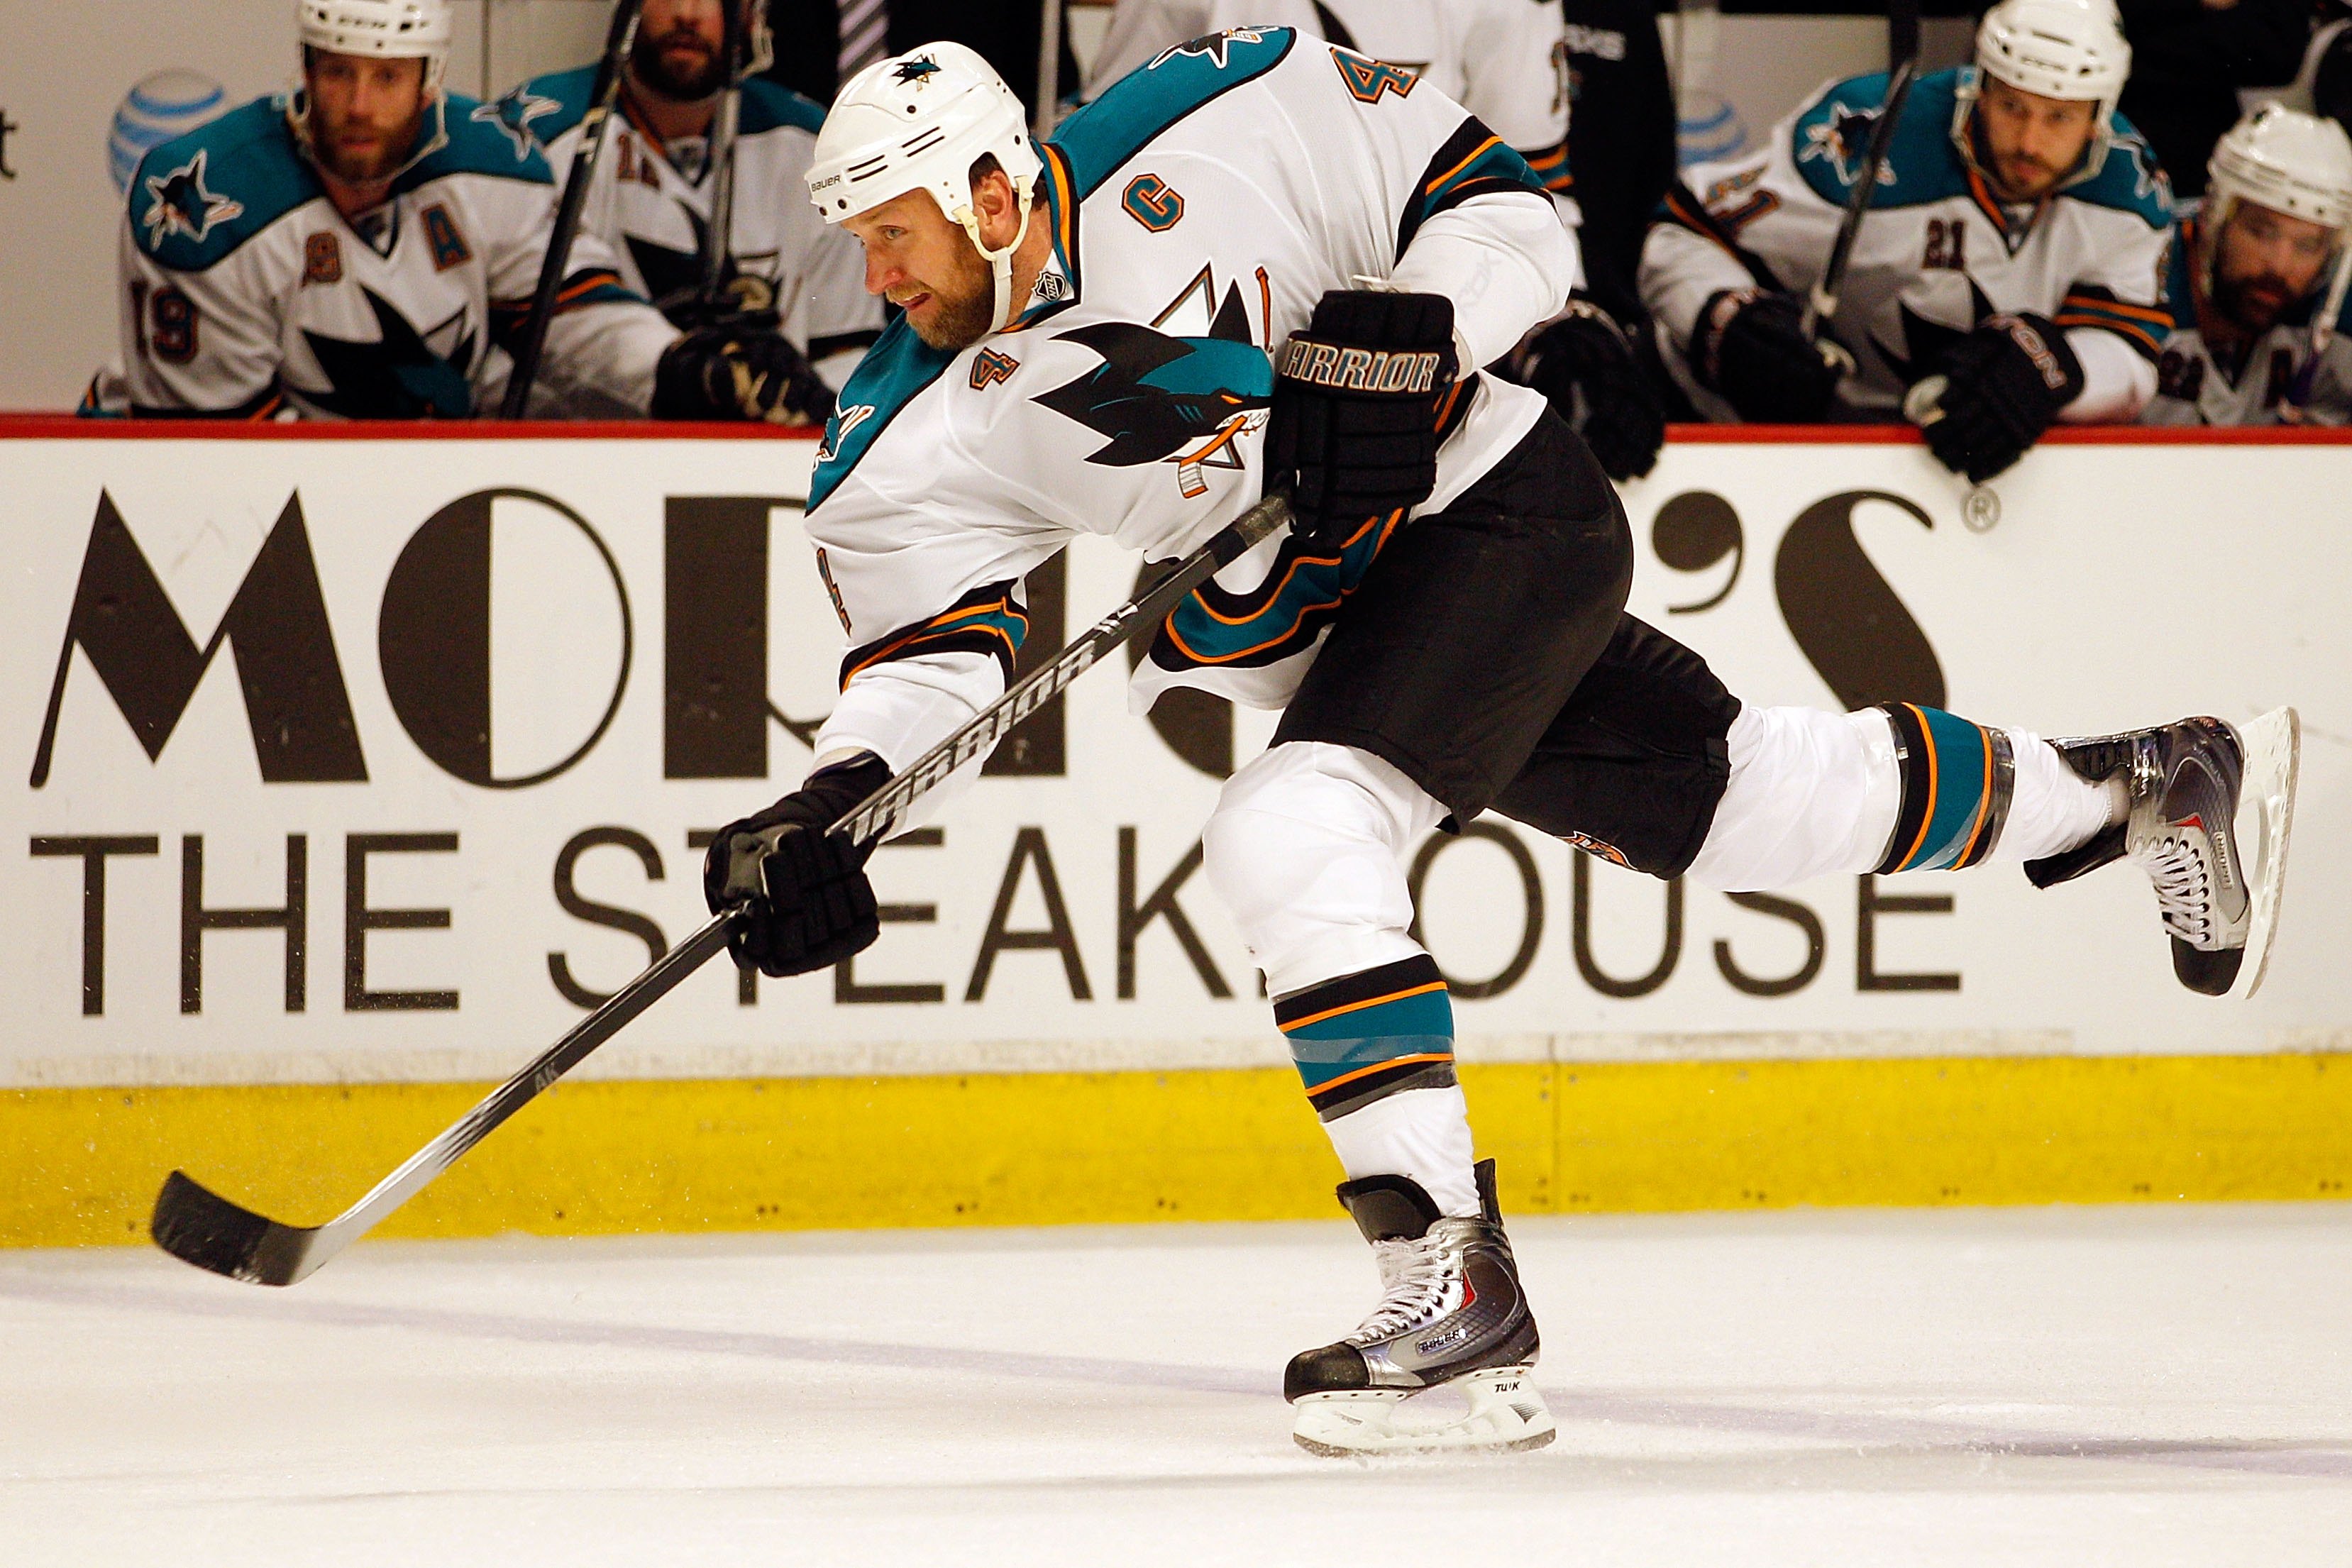 CHICAGO - MAY 21:  Rob Blake #4 of the San Jose Sharks slaps the puck while taking on the Chicago Blackhawks in Game Three of the Western Conference Finals during the 2010 NHL Stanley Cup Playoffs at the United Center on May 21, 2010 in Chicago, Illinois.